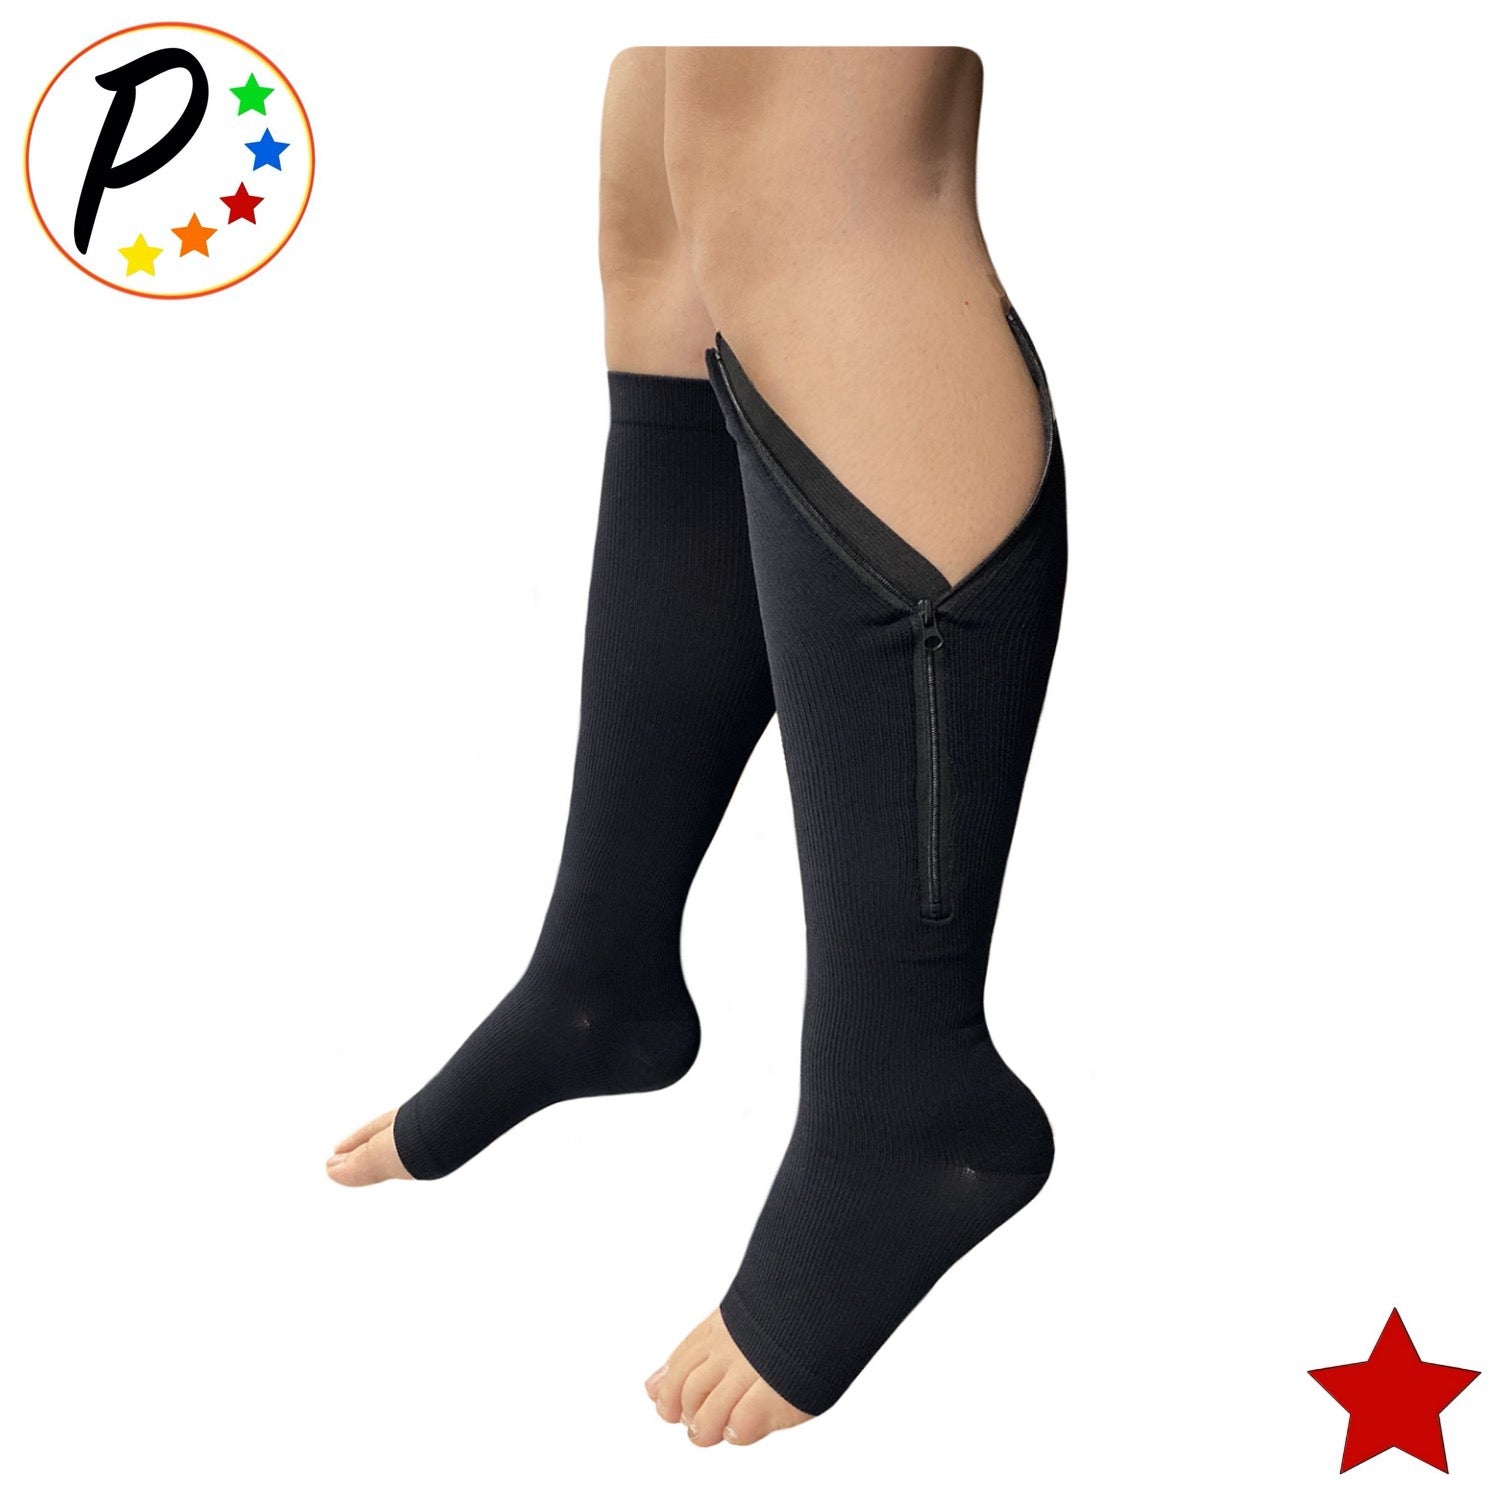 Women's XXX-Large Firm Support Zippered Open Toe Knee High Compression  Socks NEW